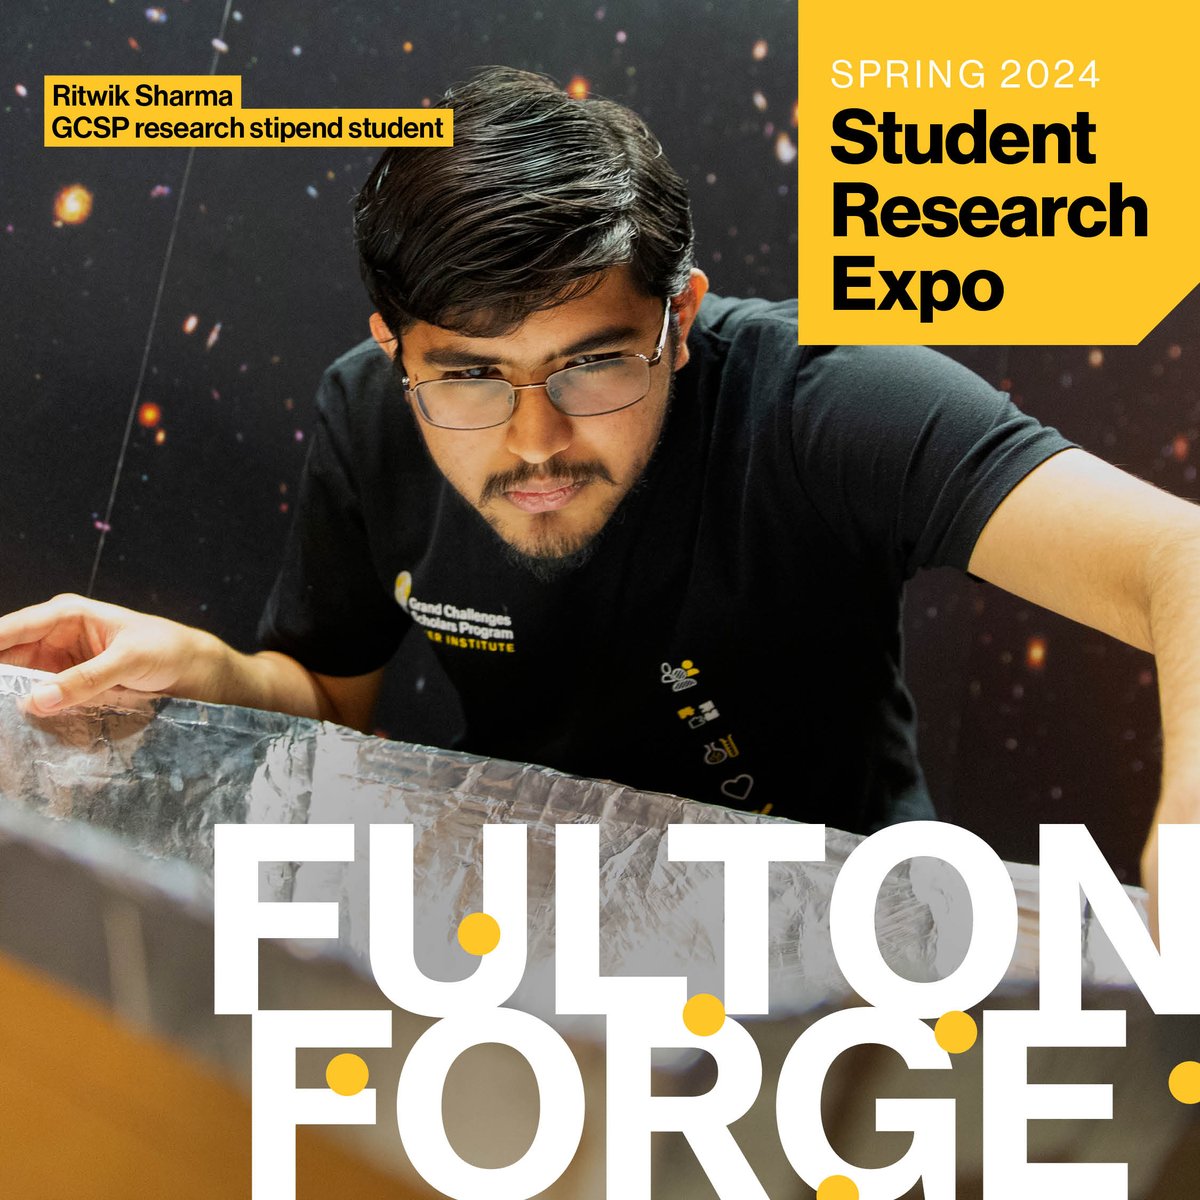 👉TODAY! Stop by the Student Pavilion on the Tempe campus from 1–3 p.m. and see what real-world challenges #ASUEngineering student researchers are solving. Students from the FURI, MORE and GCSP research stipend programs will showcase their projects. forge.engineering.asu.edu